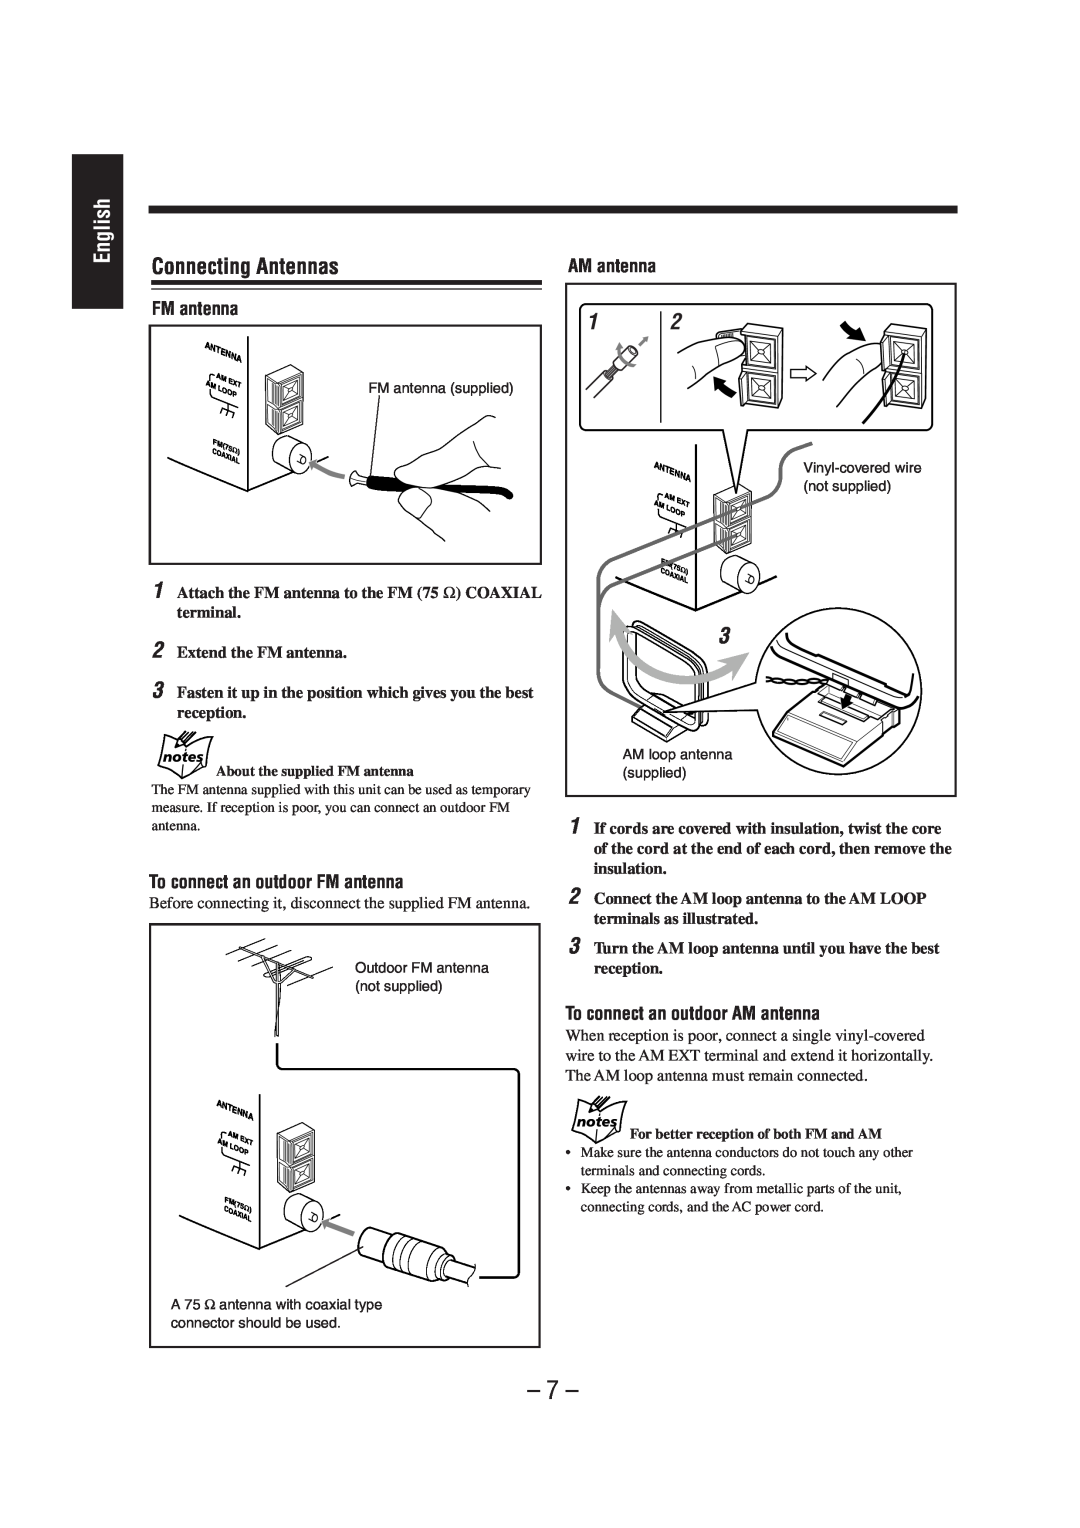 JVC UX-A52 manual English, Connecting Antennas, AM antenna, To connect an outdoor FM antenna 